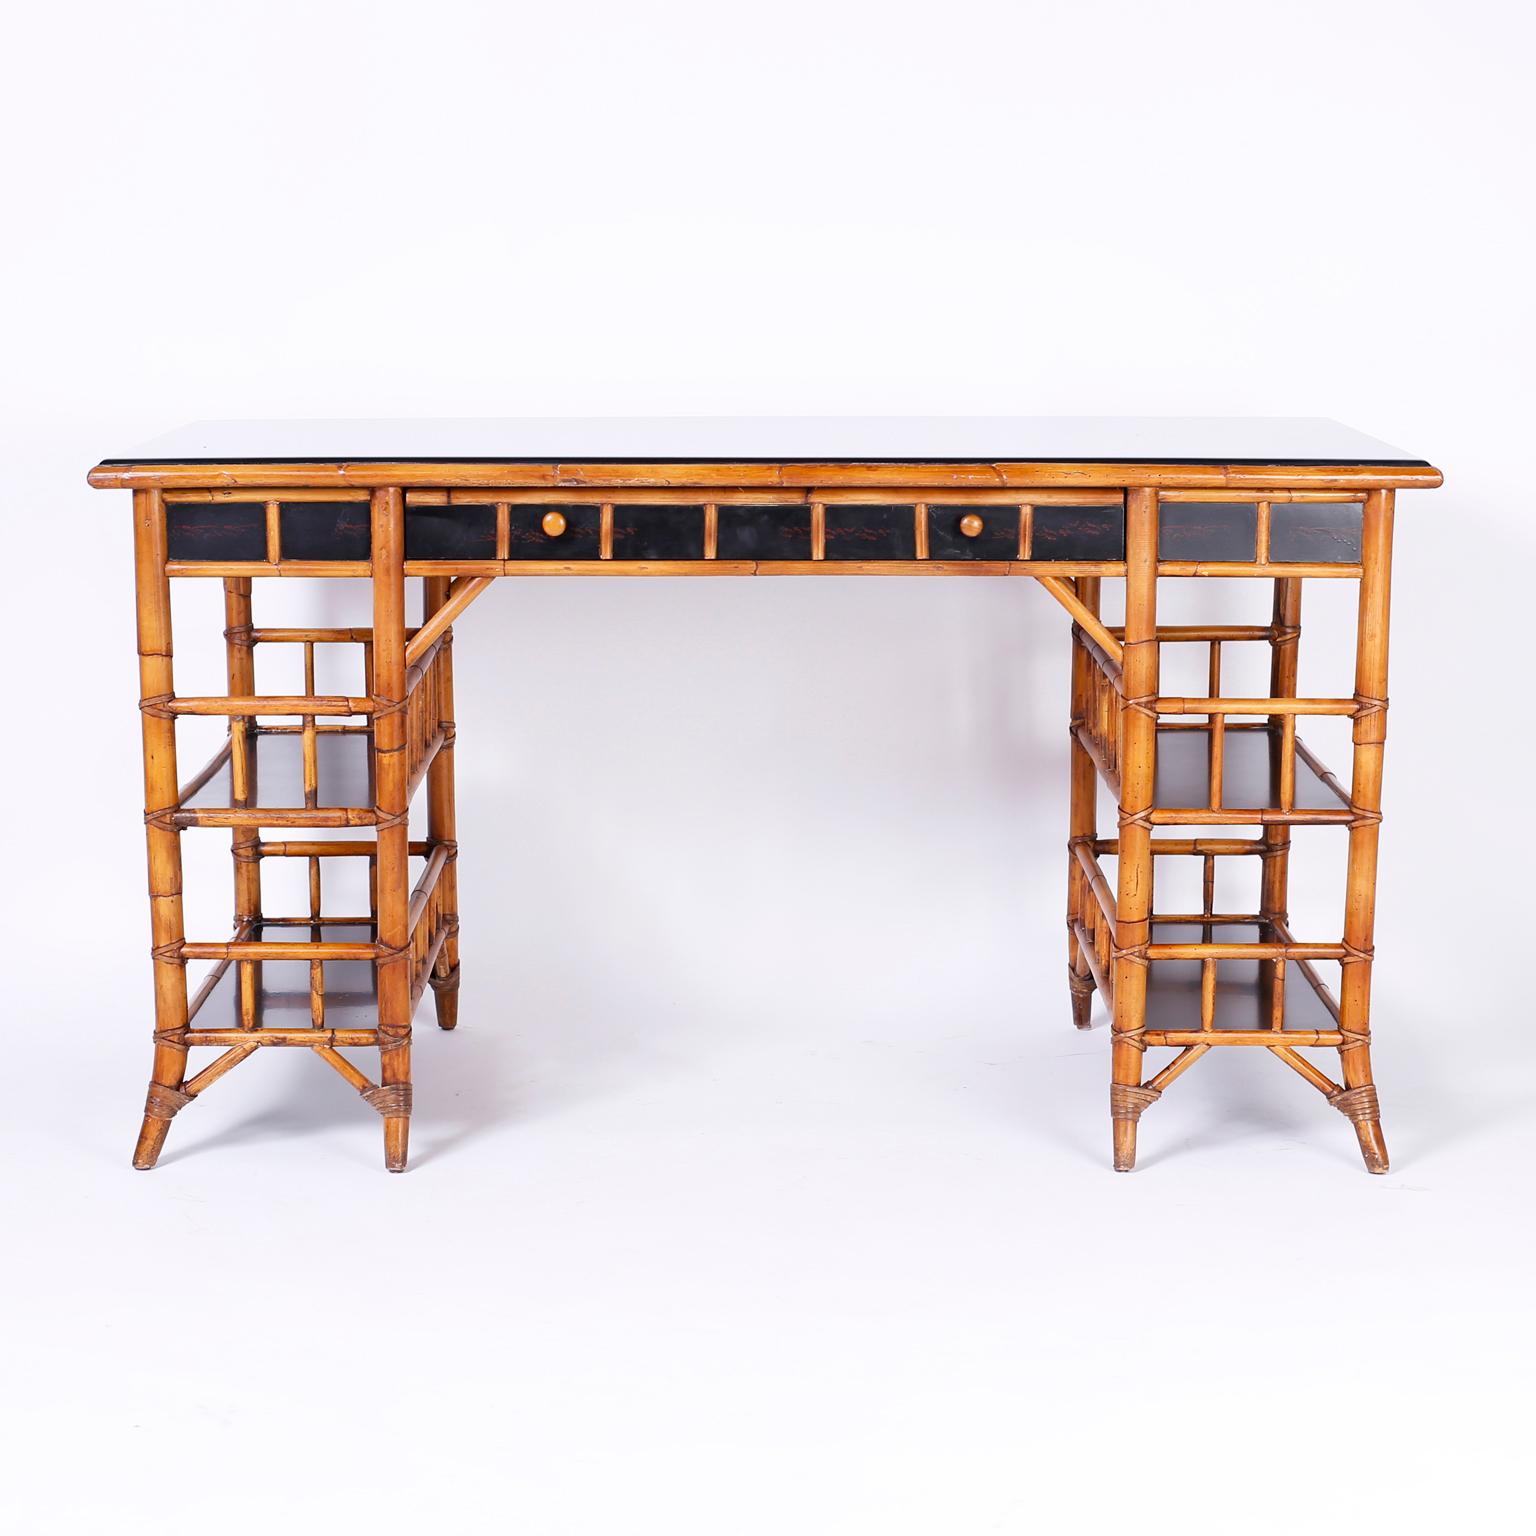 British colonial style midcentury bamboo desk with a black lacquered top, sides and storage surfaces. Signed Milling Road a division of Baker furniture.